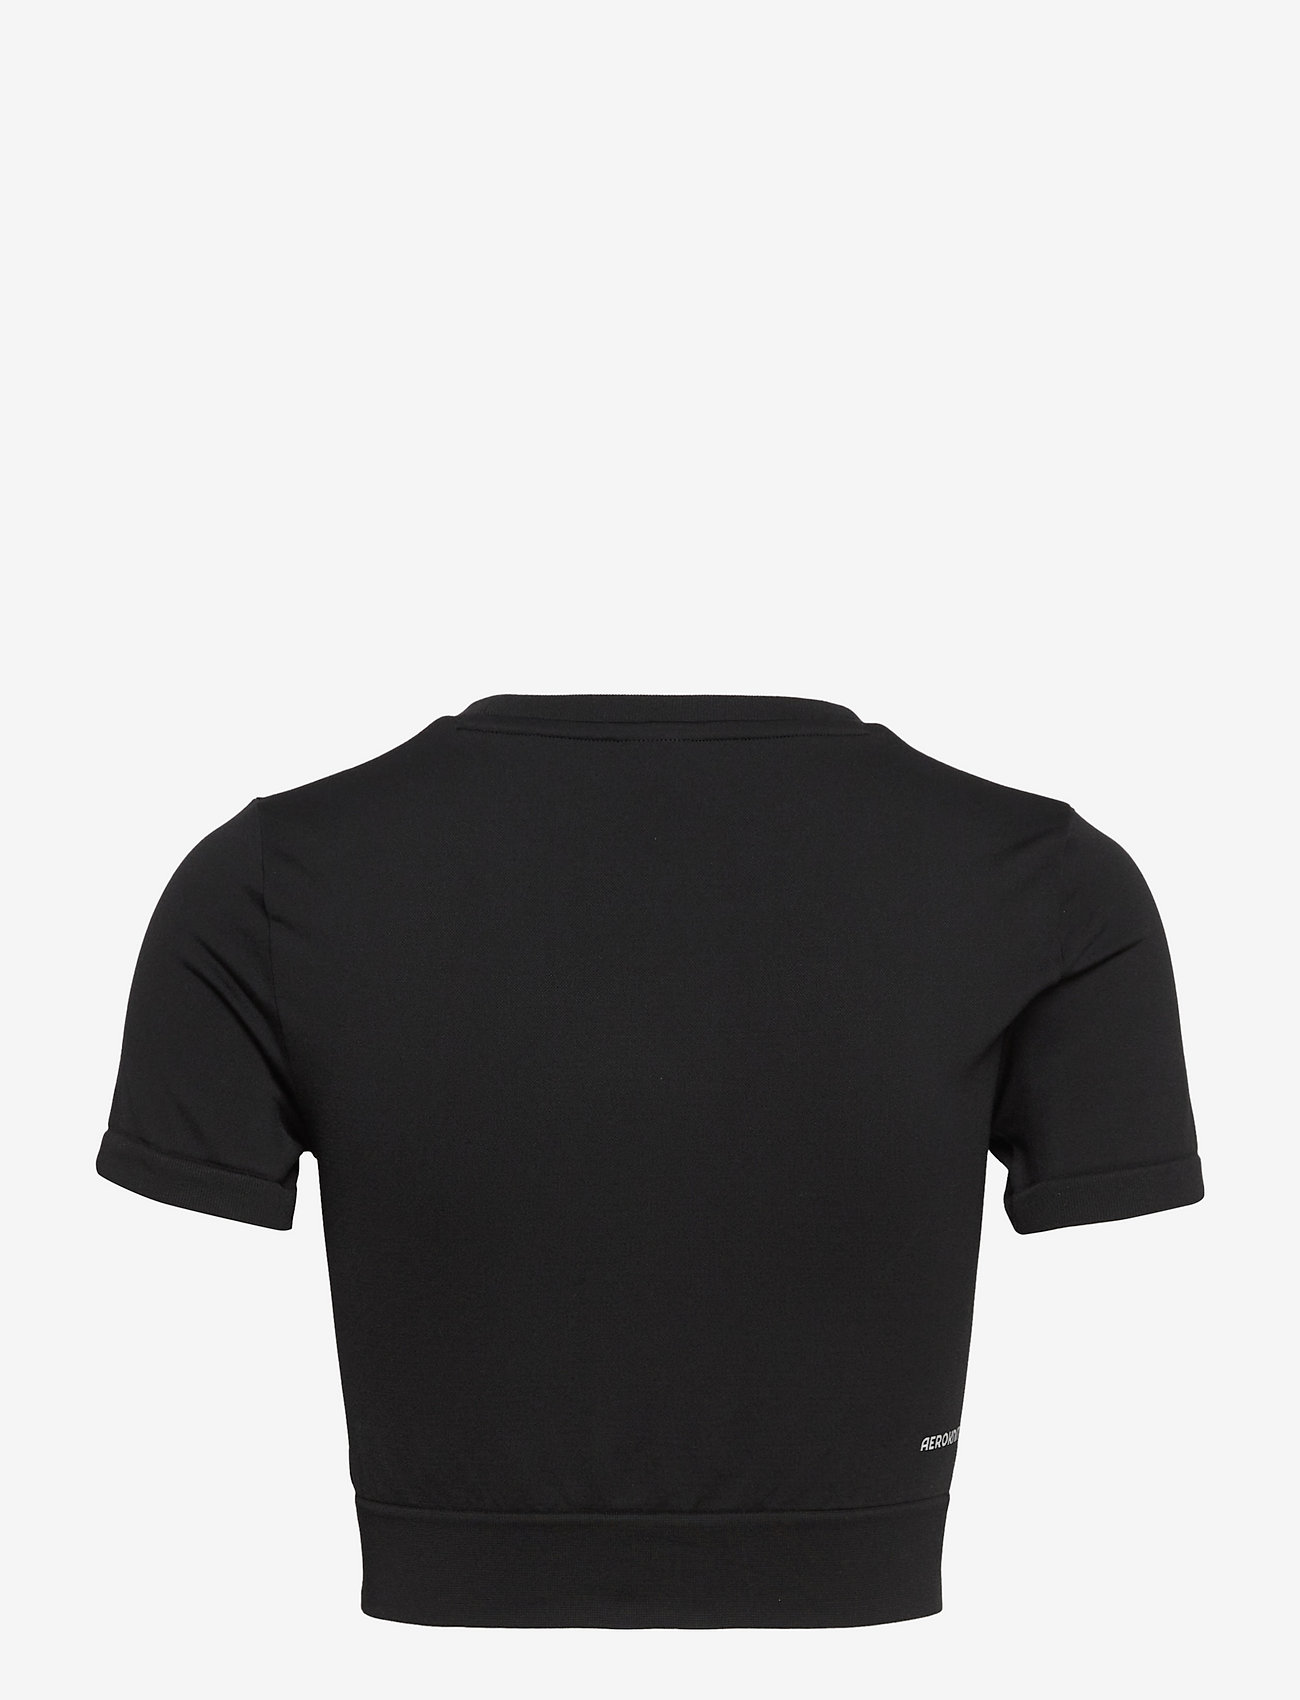 adidas Performance - AEROKNIT Seamless Fitted Cropped Tee W - navel shirts - black/white - 1